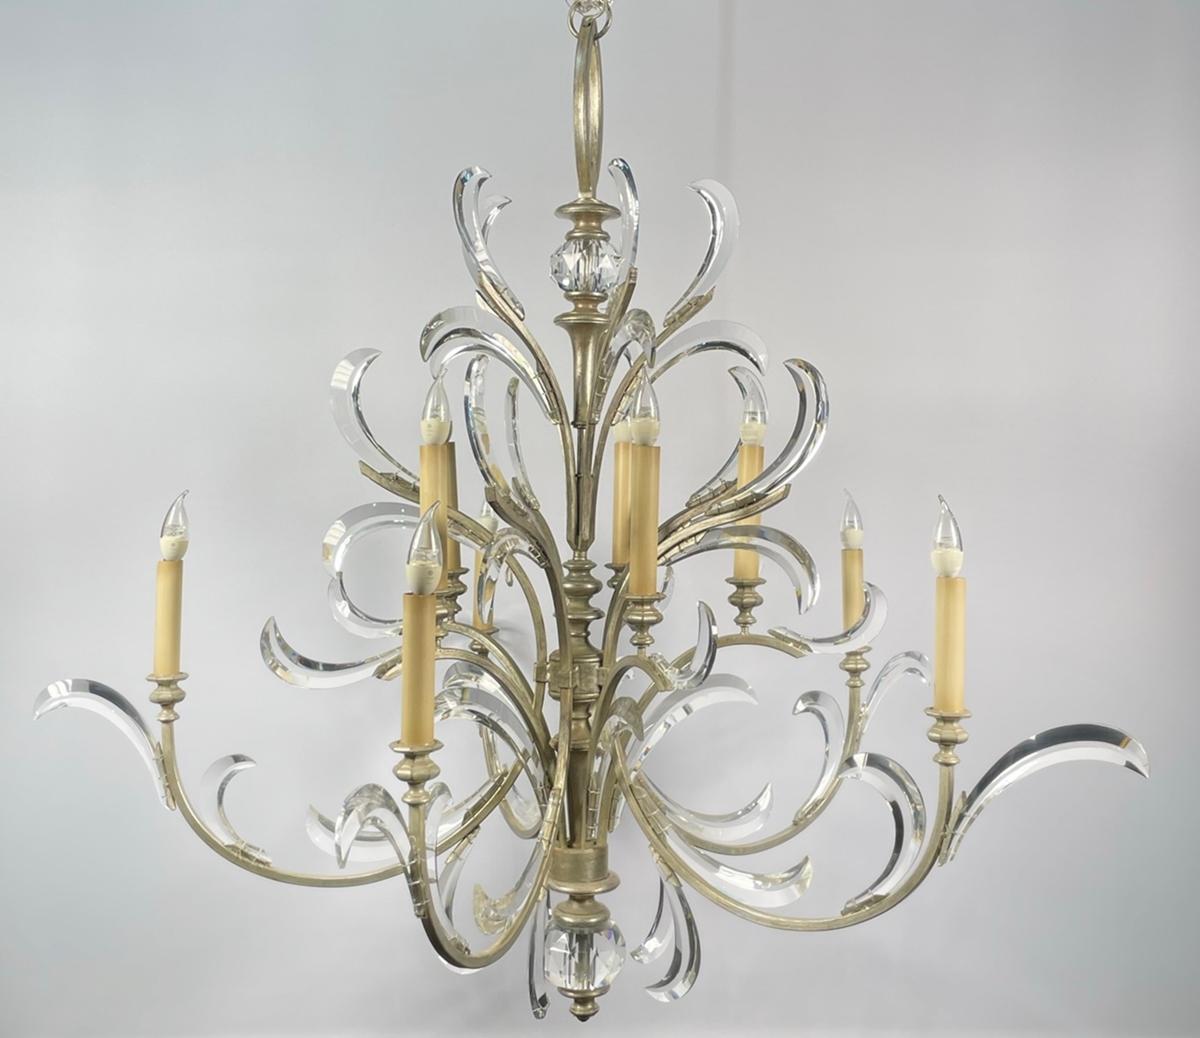 Introducing the stunning Beveled Arcs Chandelier by Fine Art Handcrafted Lighting - a true masterpiece of lighting design. This exquisite chandelier features ten lights, elegantly arranged amidst a shimmering silver frame. The beveled arcs of the